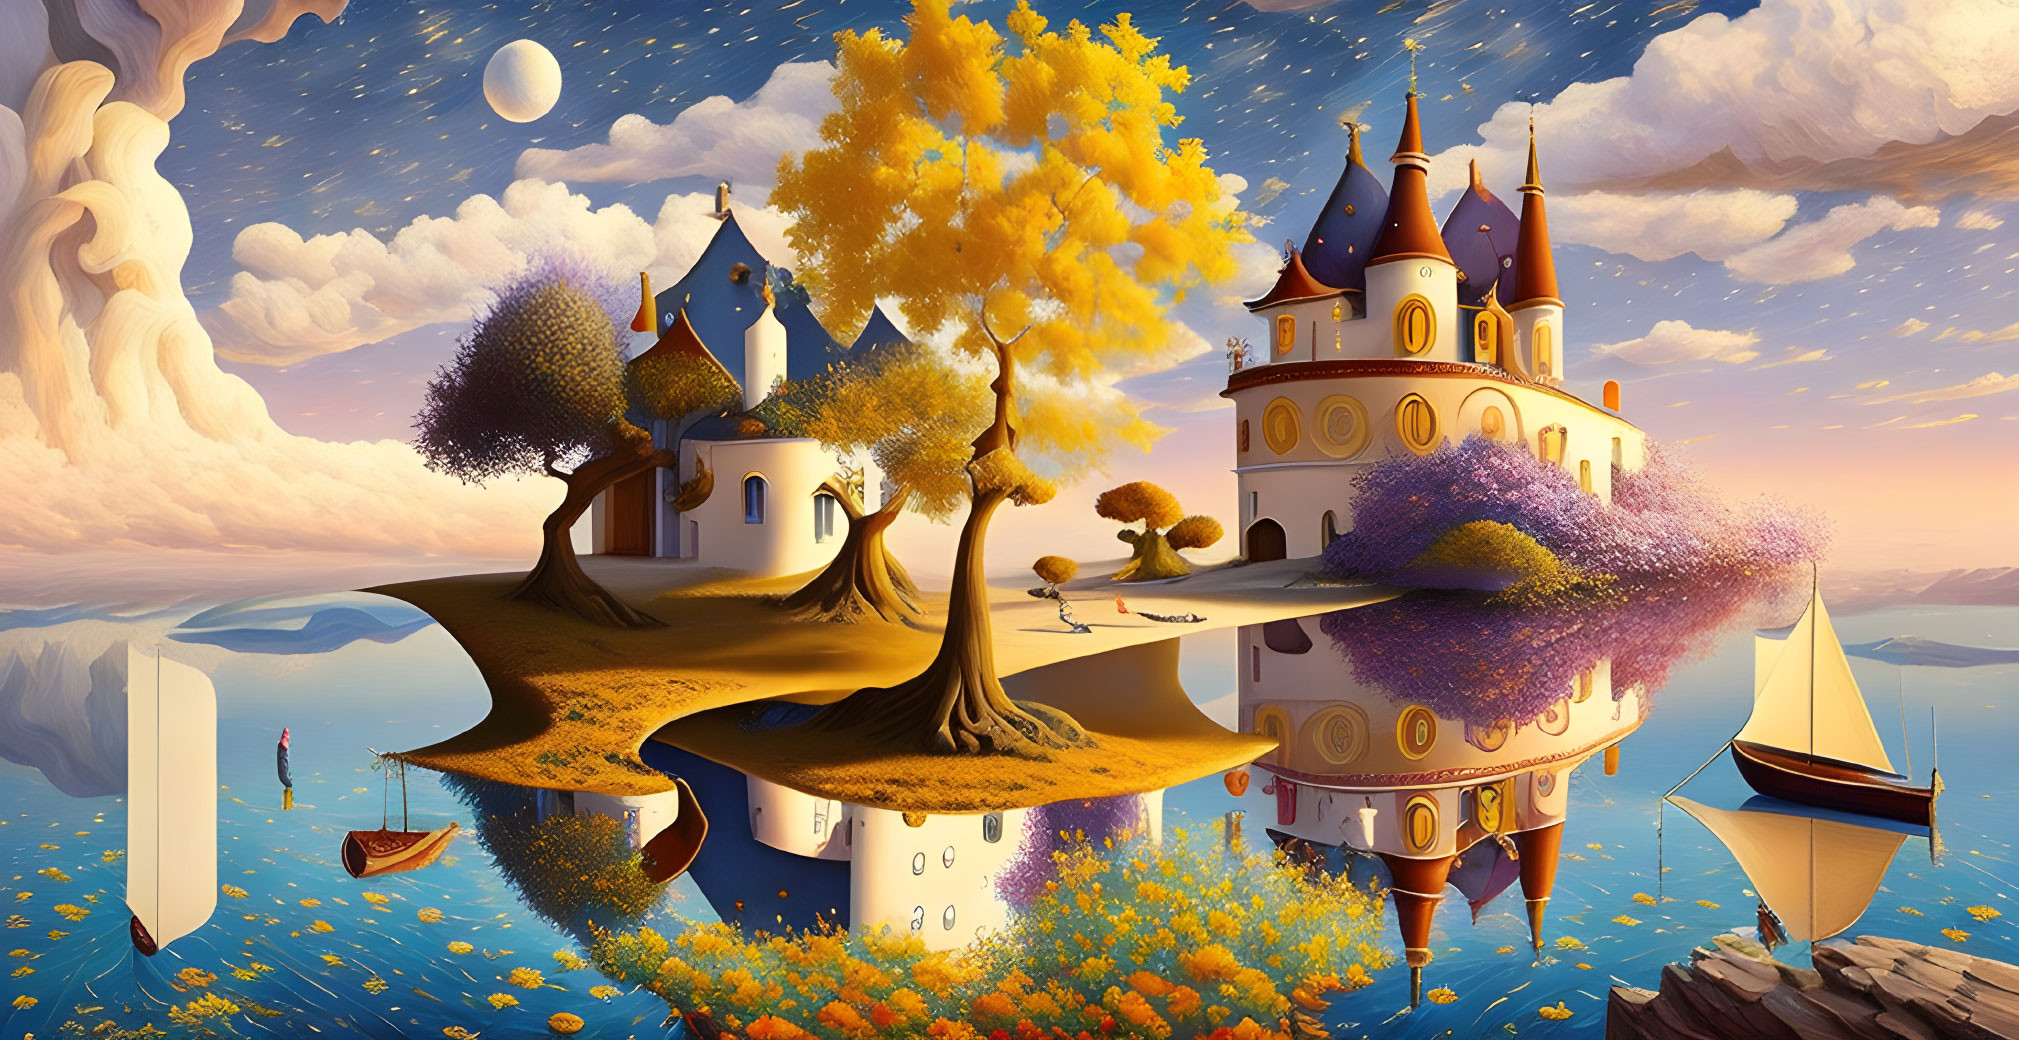 Fantasy castle on floating islands with colorful trees and dual moons.